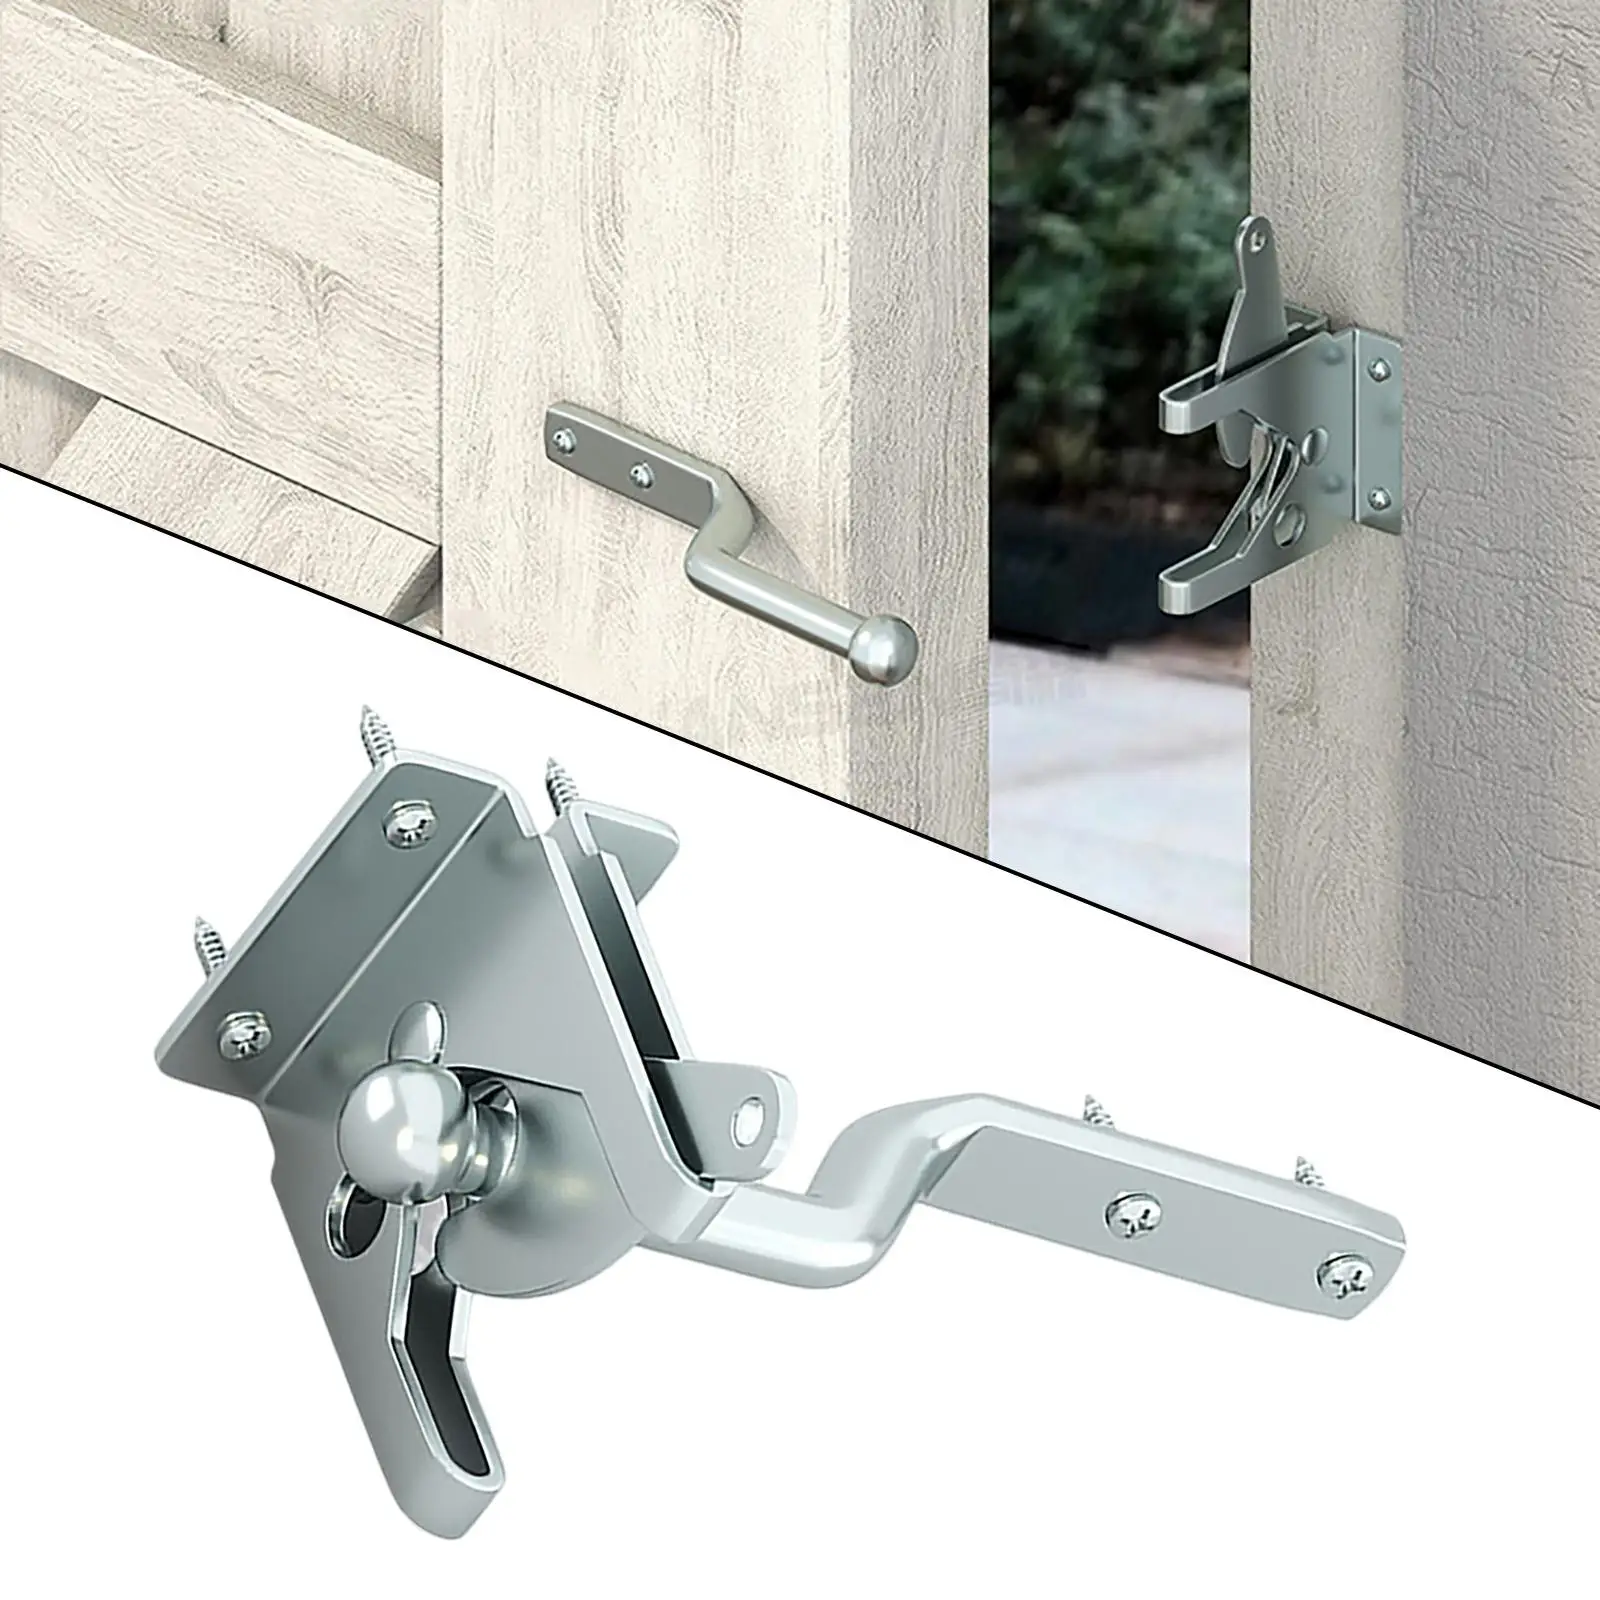 Steel Fence Lock Easy Install Rustic Decor Self Locking Door Latch Hardware Gate Latch for Garden Pasture Outdoor Wood Fence